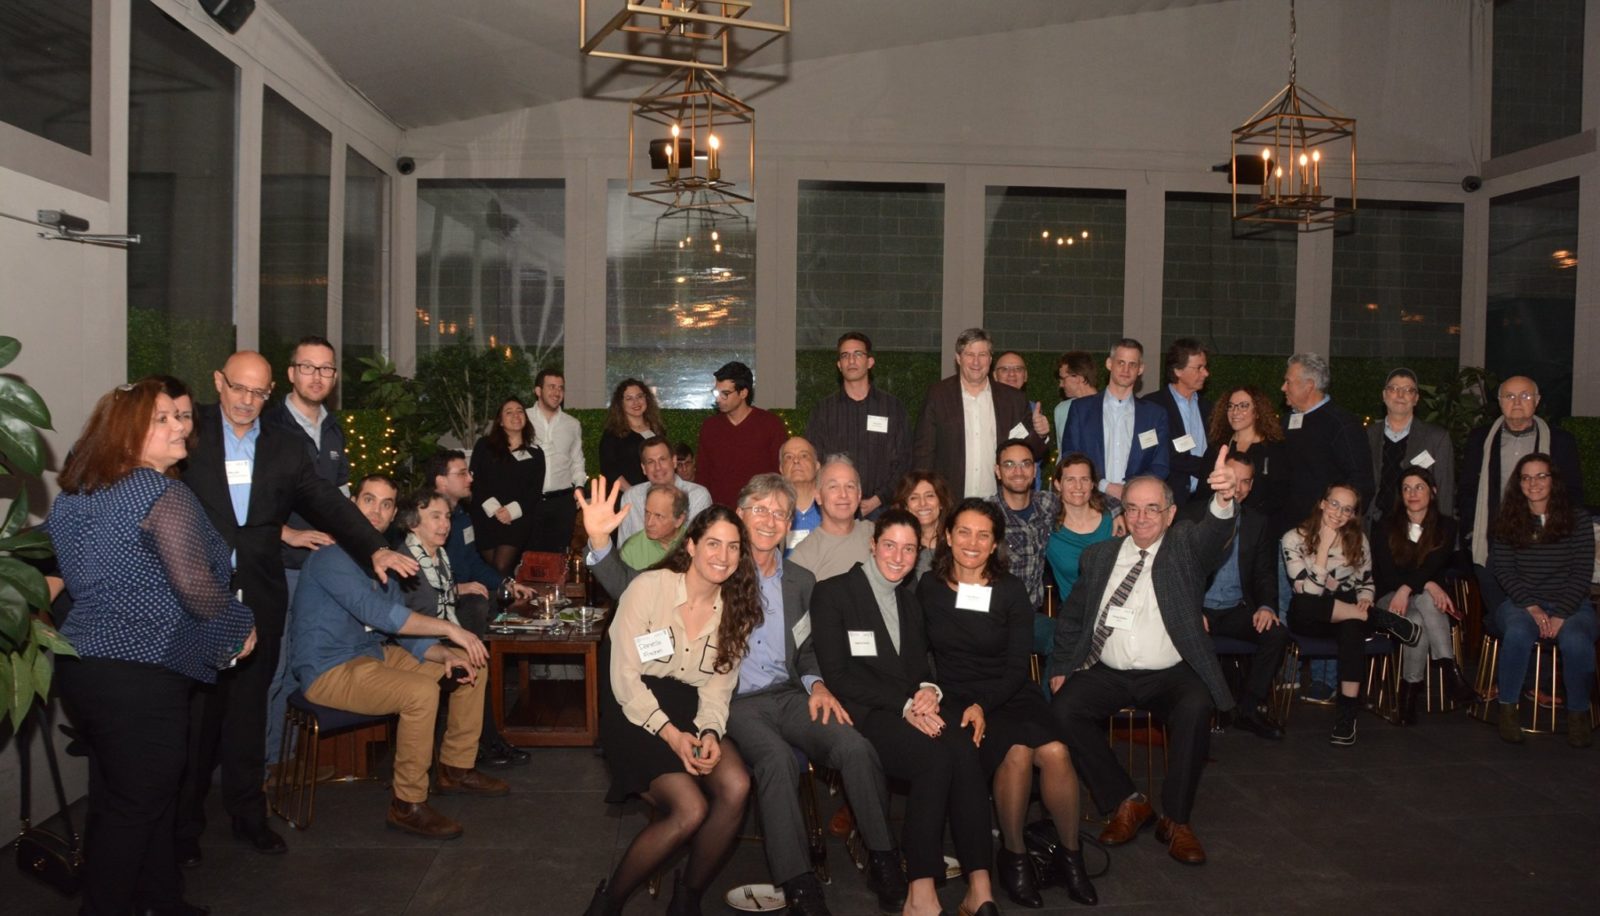 Technion Alumni taking a group photo at an event in New York City.